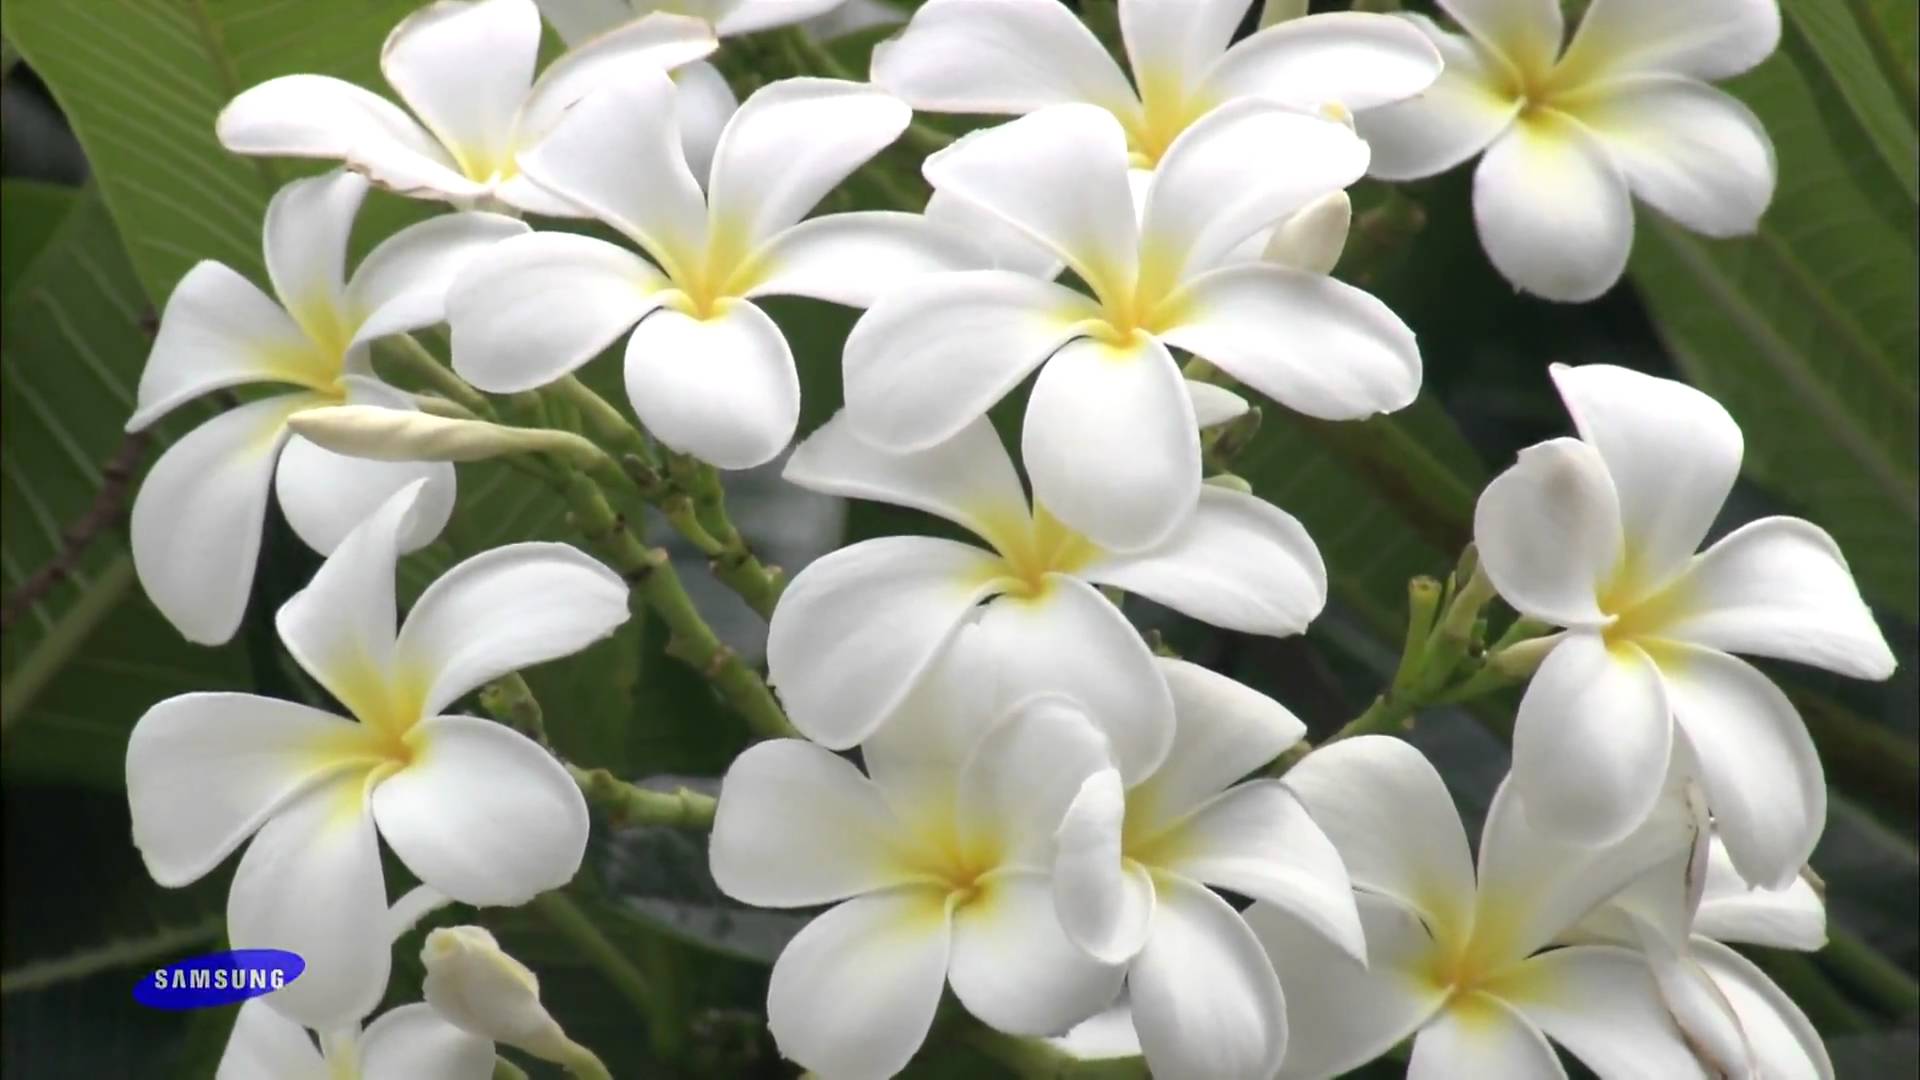 Samsung HD Demo - The Beauty of Nature Flowers 1080P - YouTube